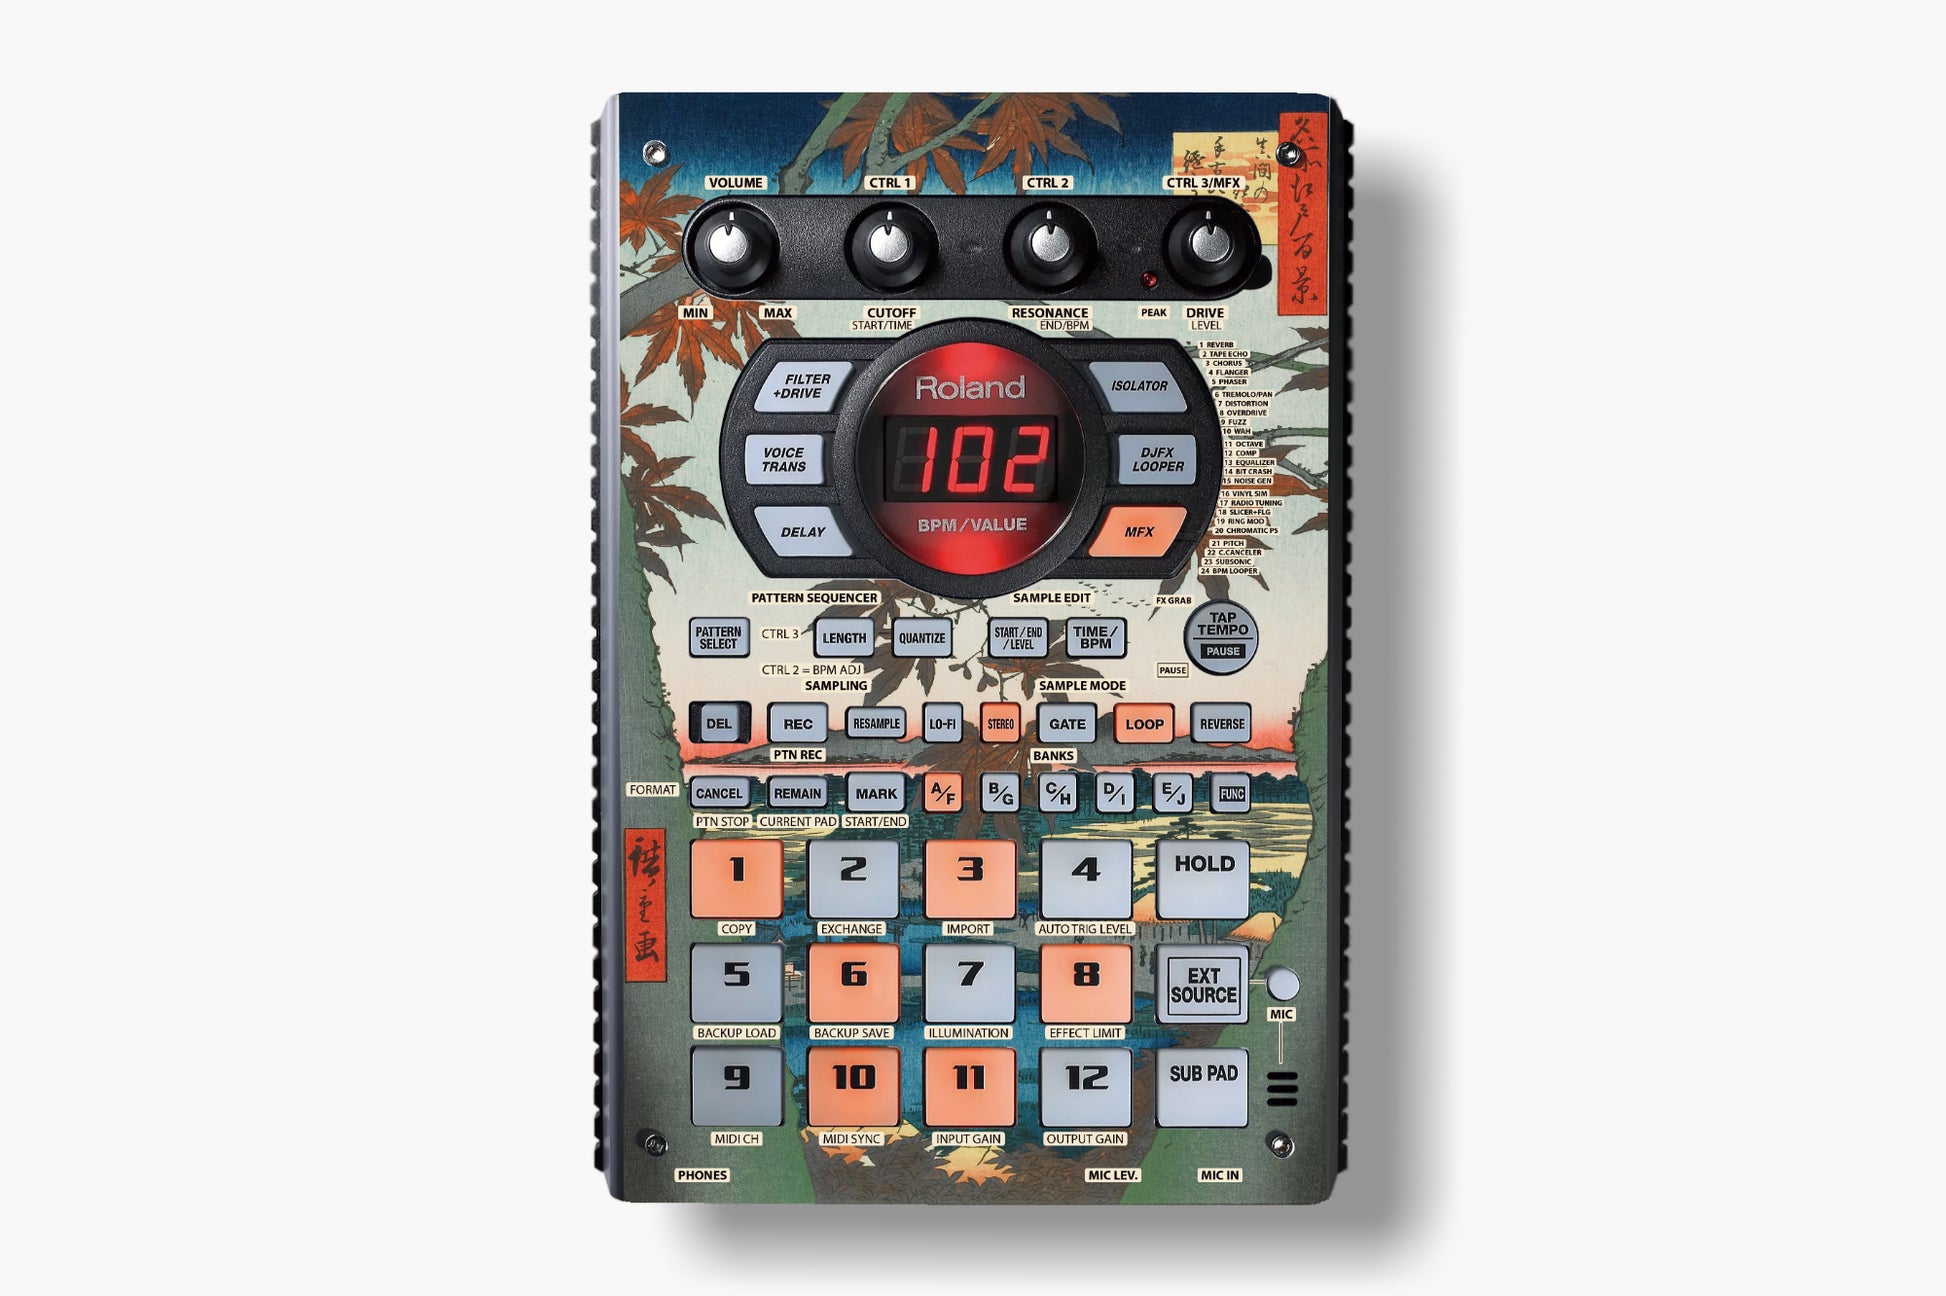 SP-404 SX Skin - Maple Trees at Mama | Cremacaffe Design